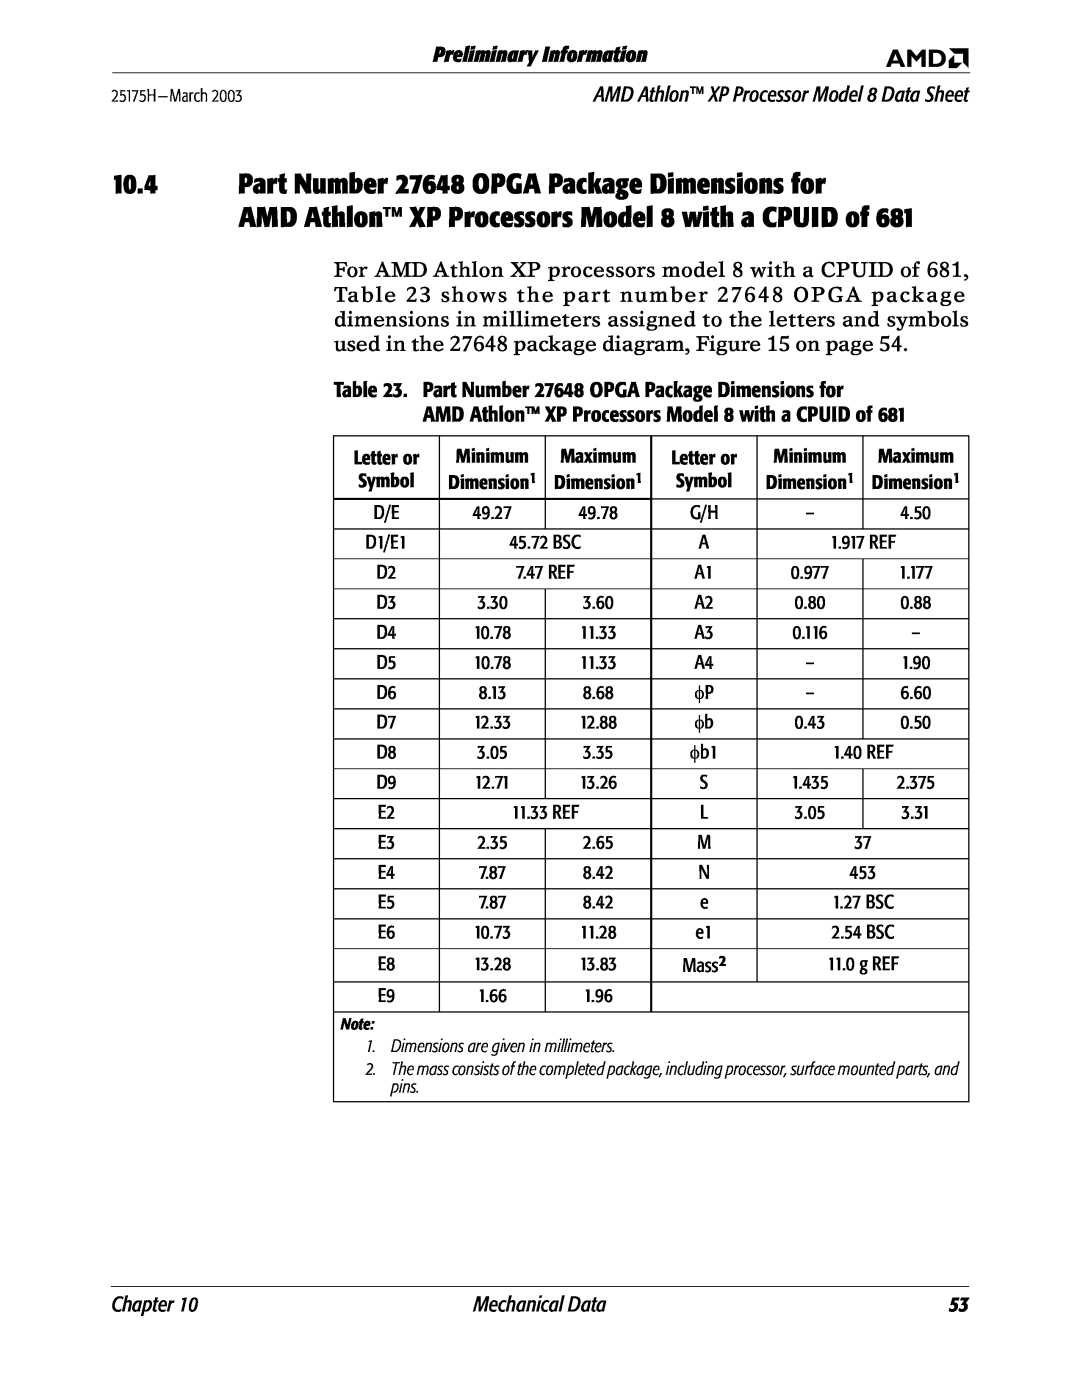 AMD manual Part Number 27648 OPGA Package Dimensions for, AMD Athlon XP Processors Model 8 with a CPUID of, Chapter 